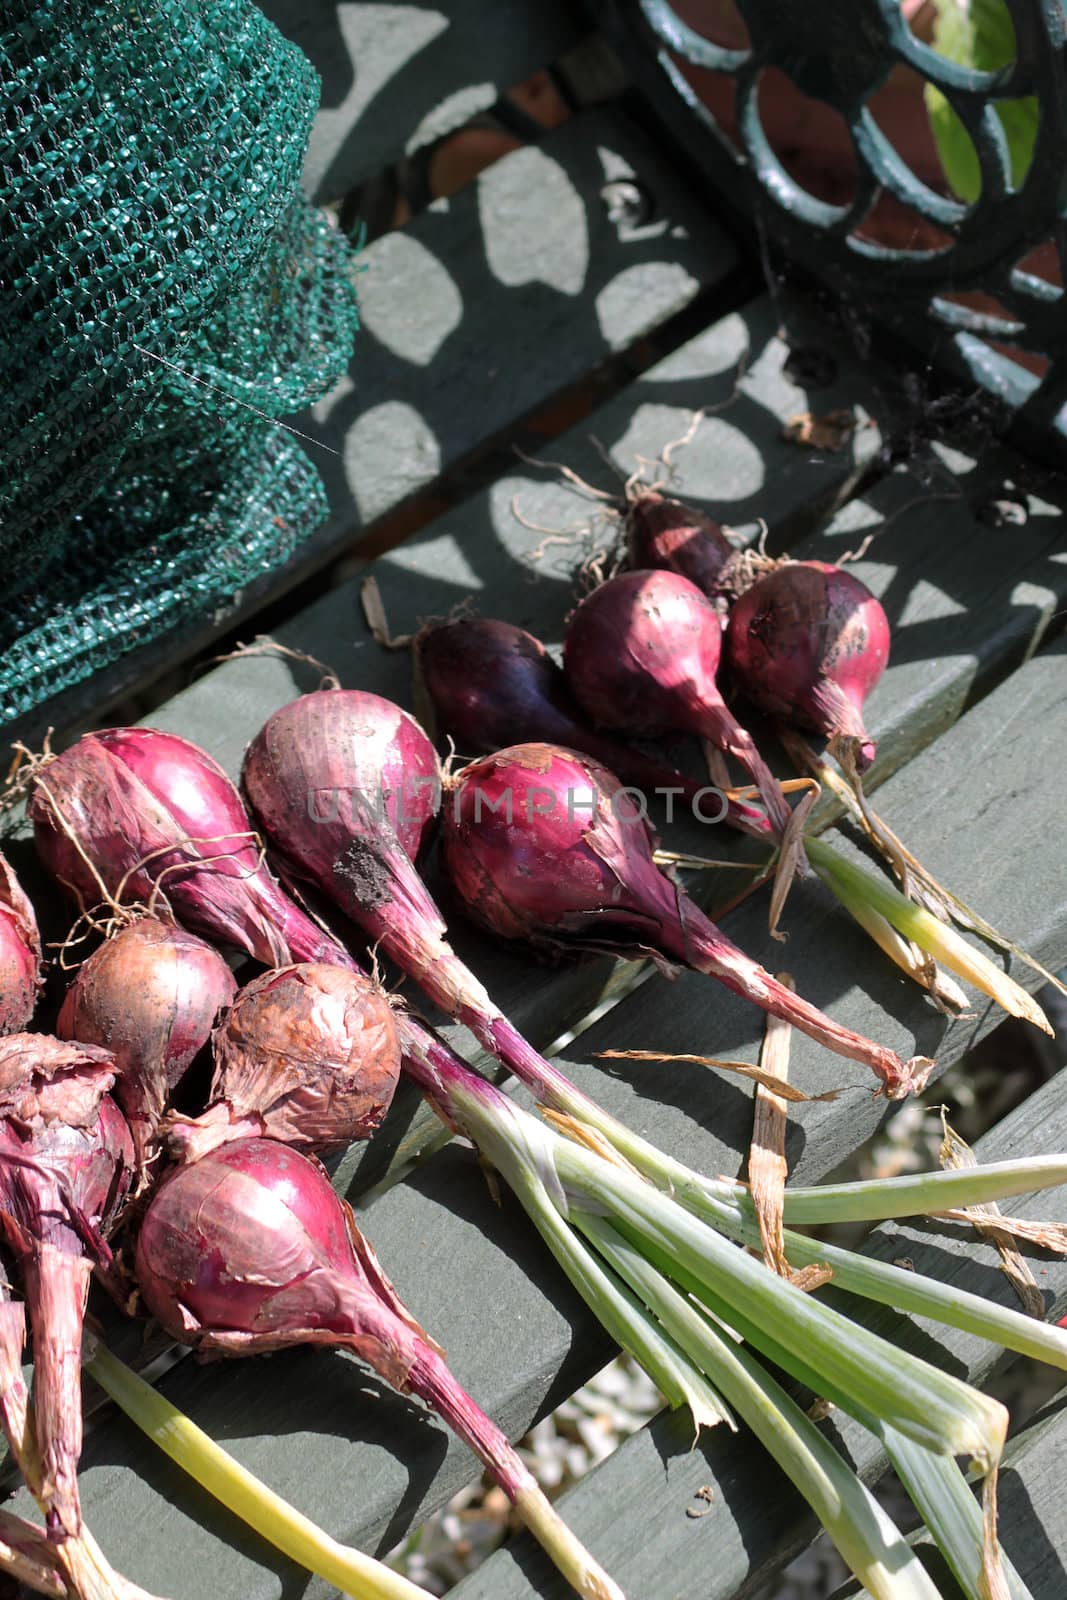 A group of onion bulbs, Red Baron variety, set on a wooden garden bench.